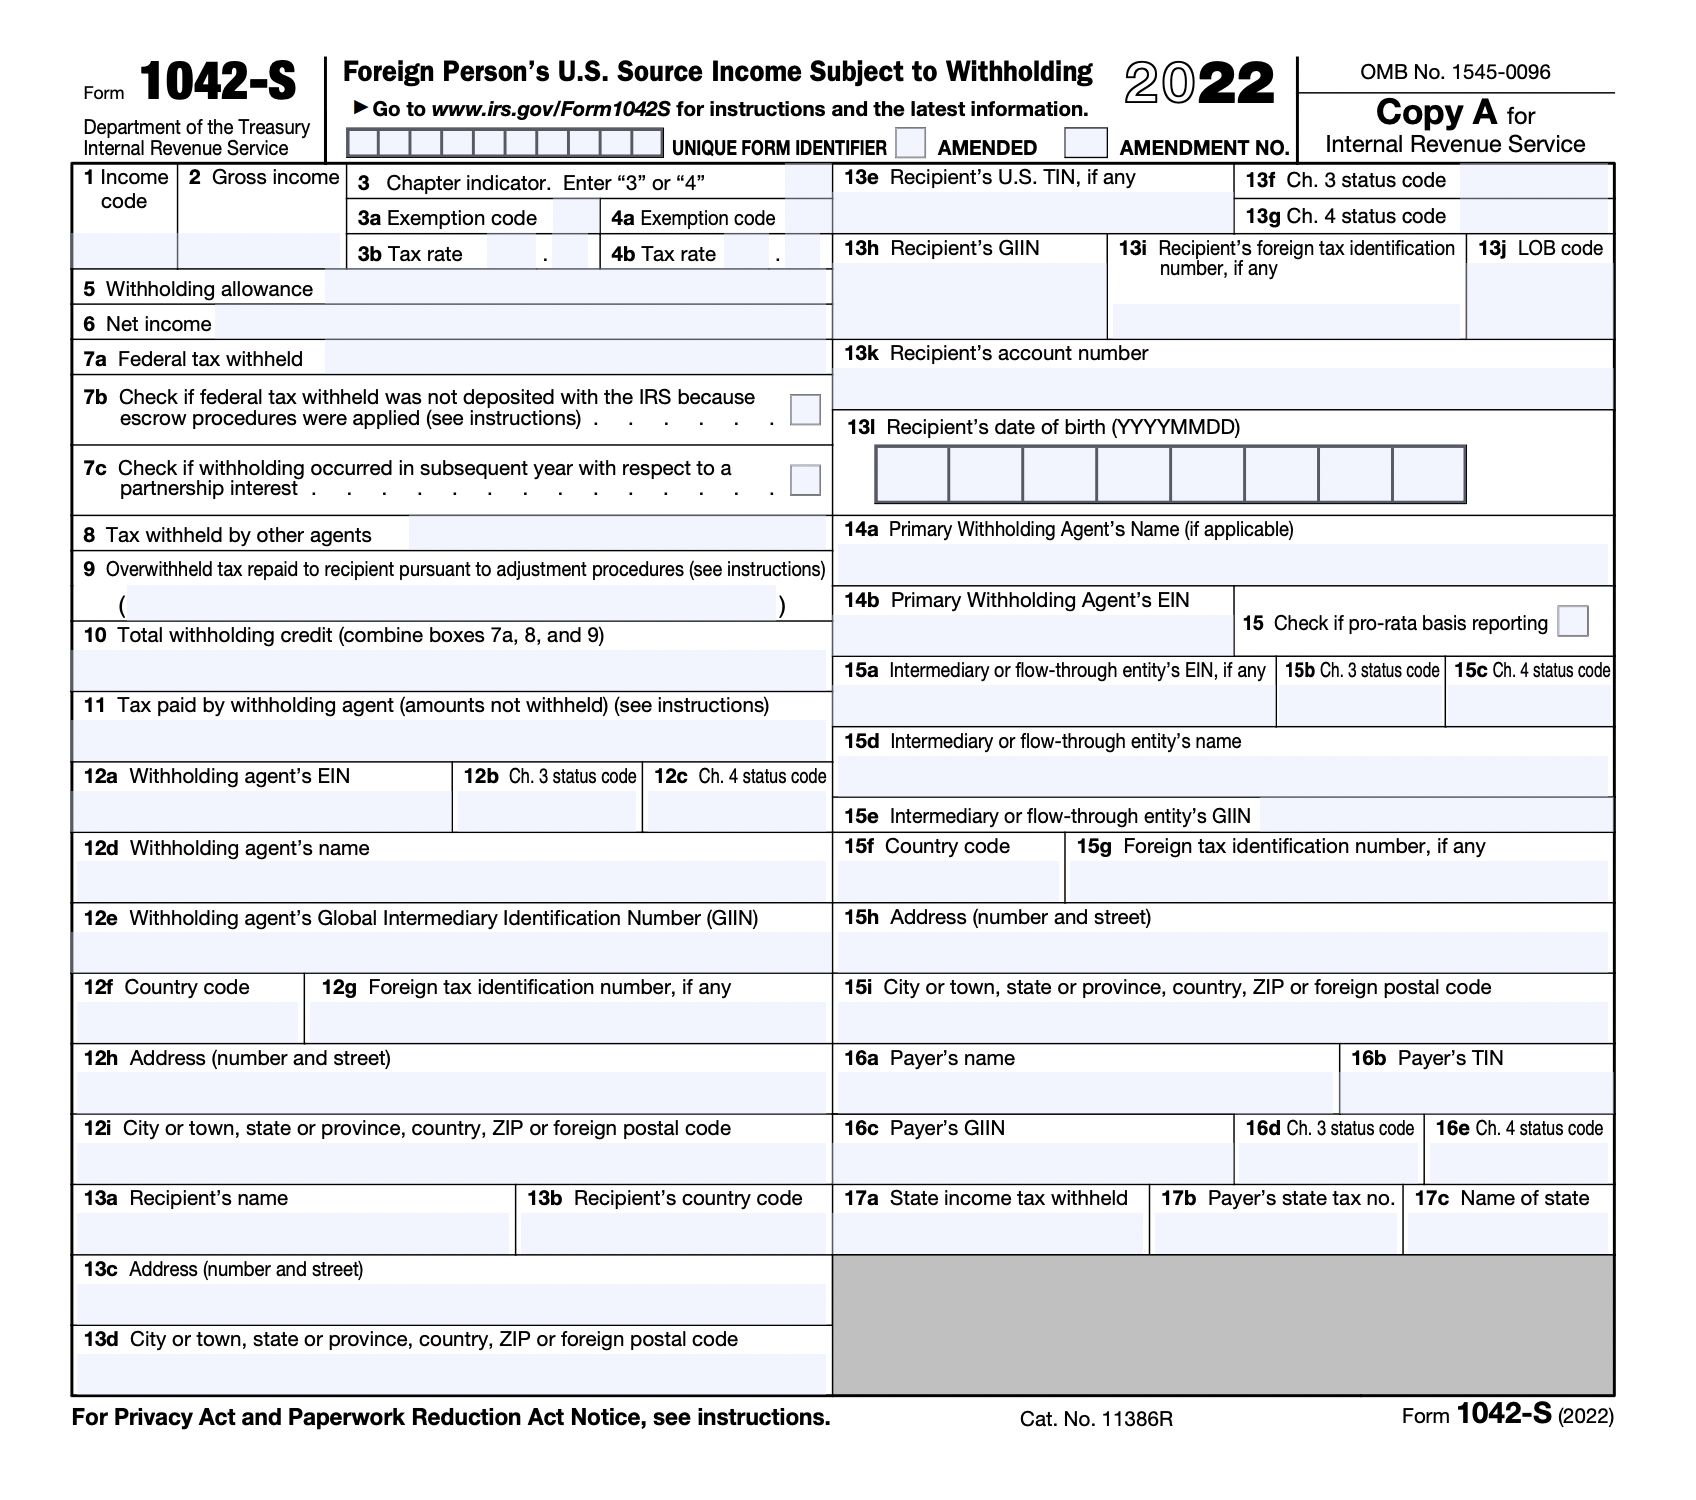 Screen capture of IRS Form 1042-S